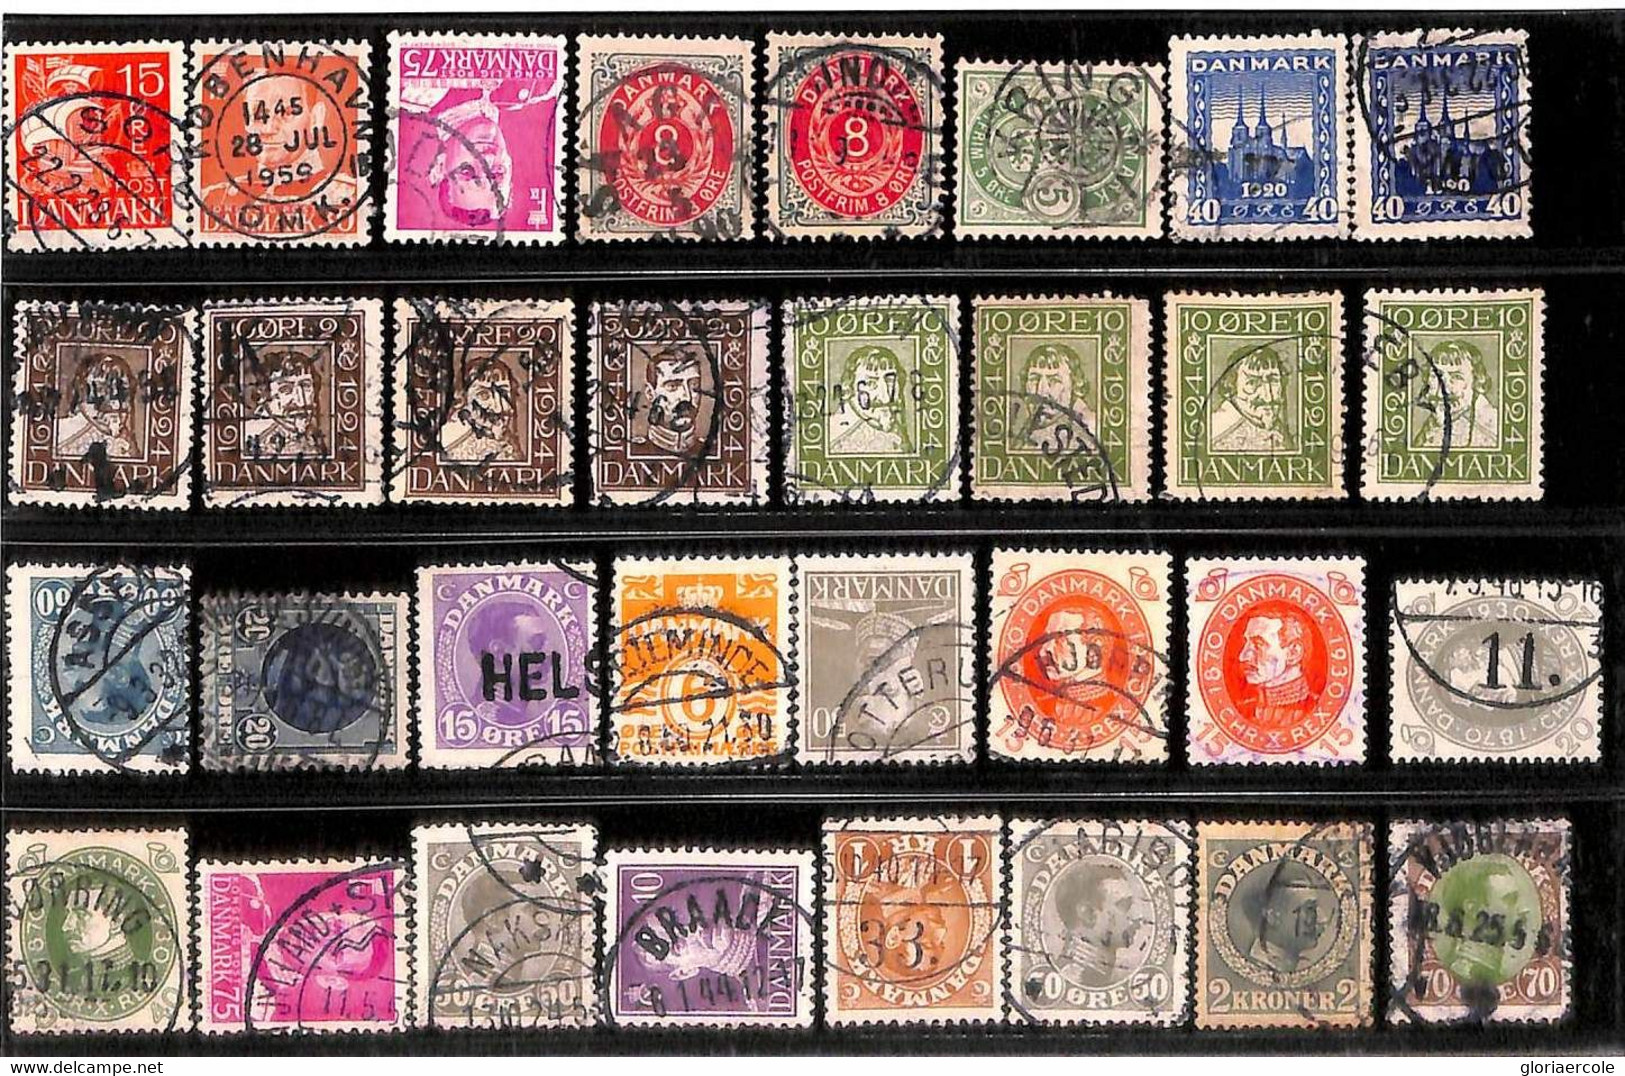 76392 - DENMARK - STAMPS - - LOT Of USED STAMPS With Nice POSTMARKS! - Collezioni